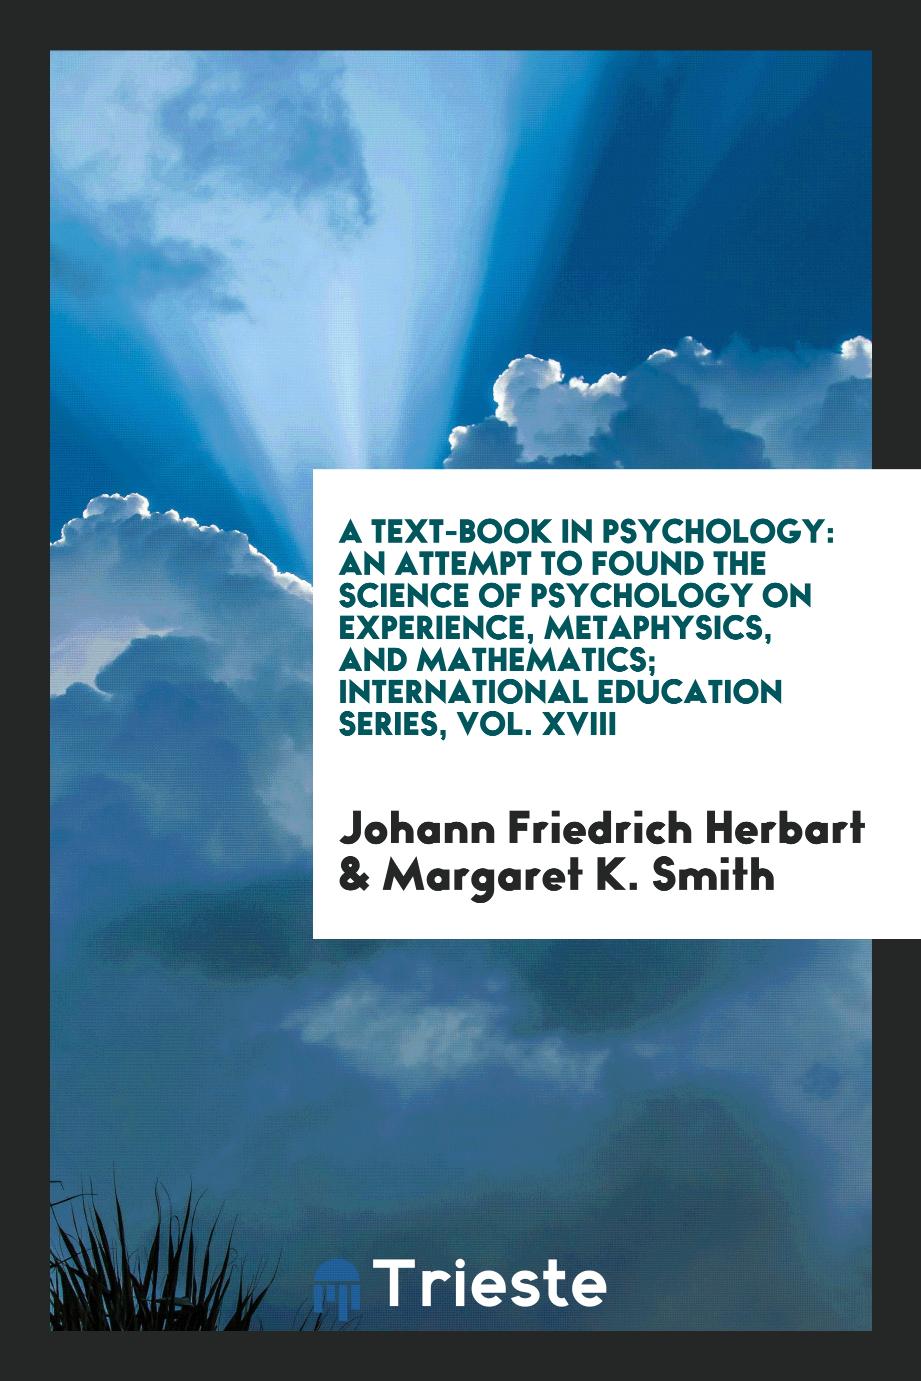 A Text-Book in Psychology: An Attempt to Found the Science of Psychology on Experience, Metaphysics, and Mathematics; International Education Series, Vol. XVIII